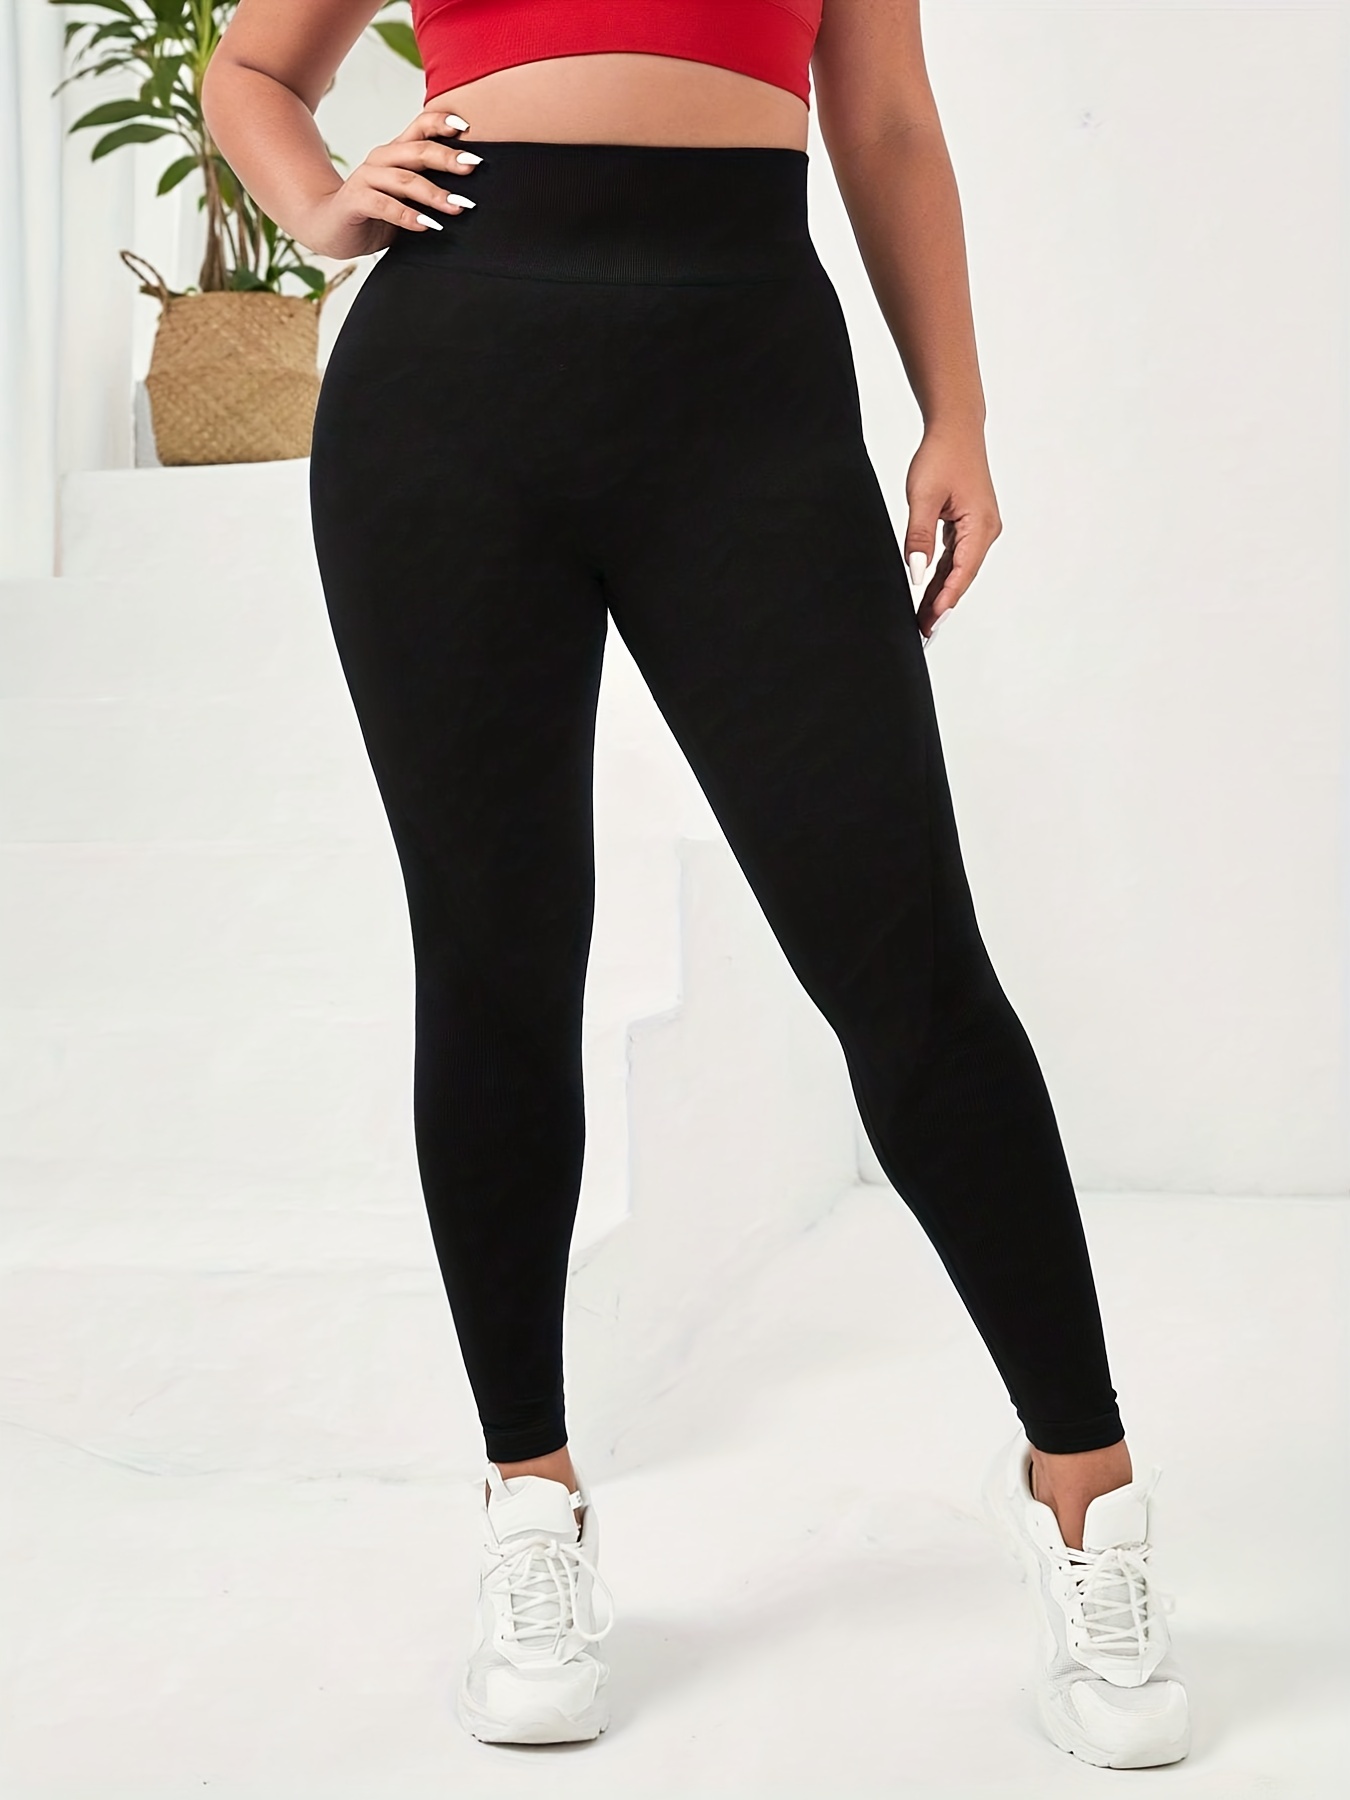 Waist Leggings Plus Size Workout Pants for Women Stirrup Pants for Women  Work Leggings for Women Office Womens Athletic Yoga Pants Work Leggings for